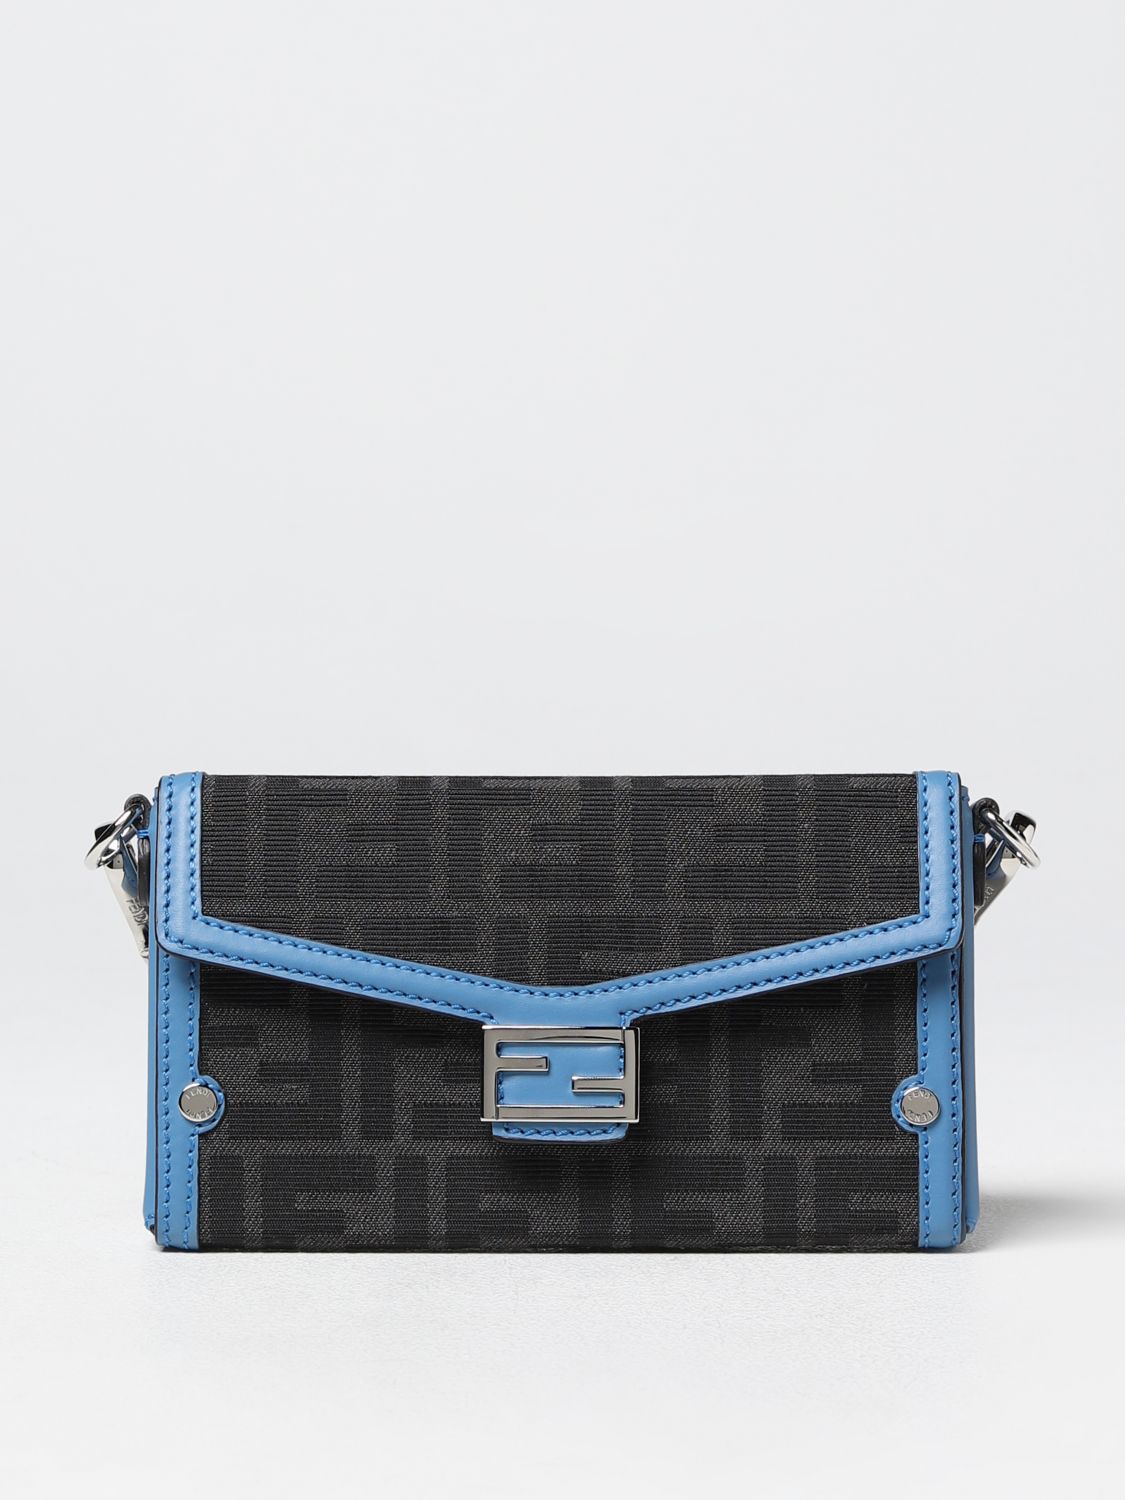 FENDI: Baguette Soft Trunk bag in canvas and leather - Gnawed